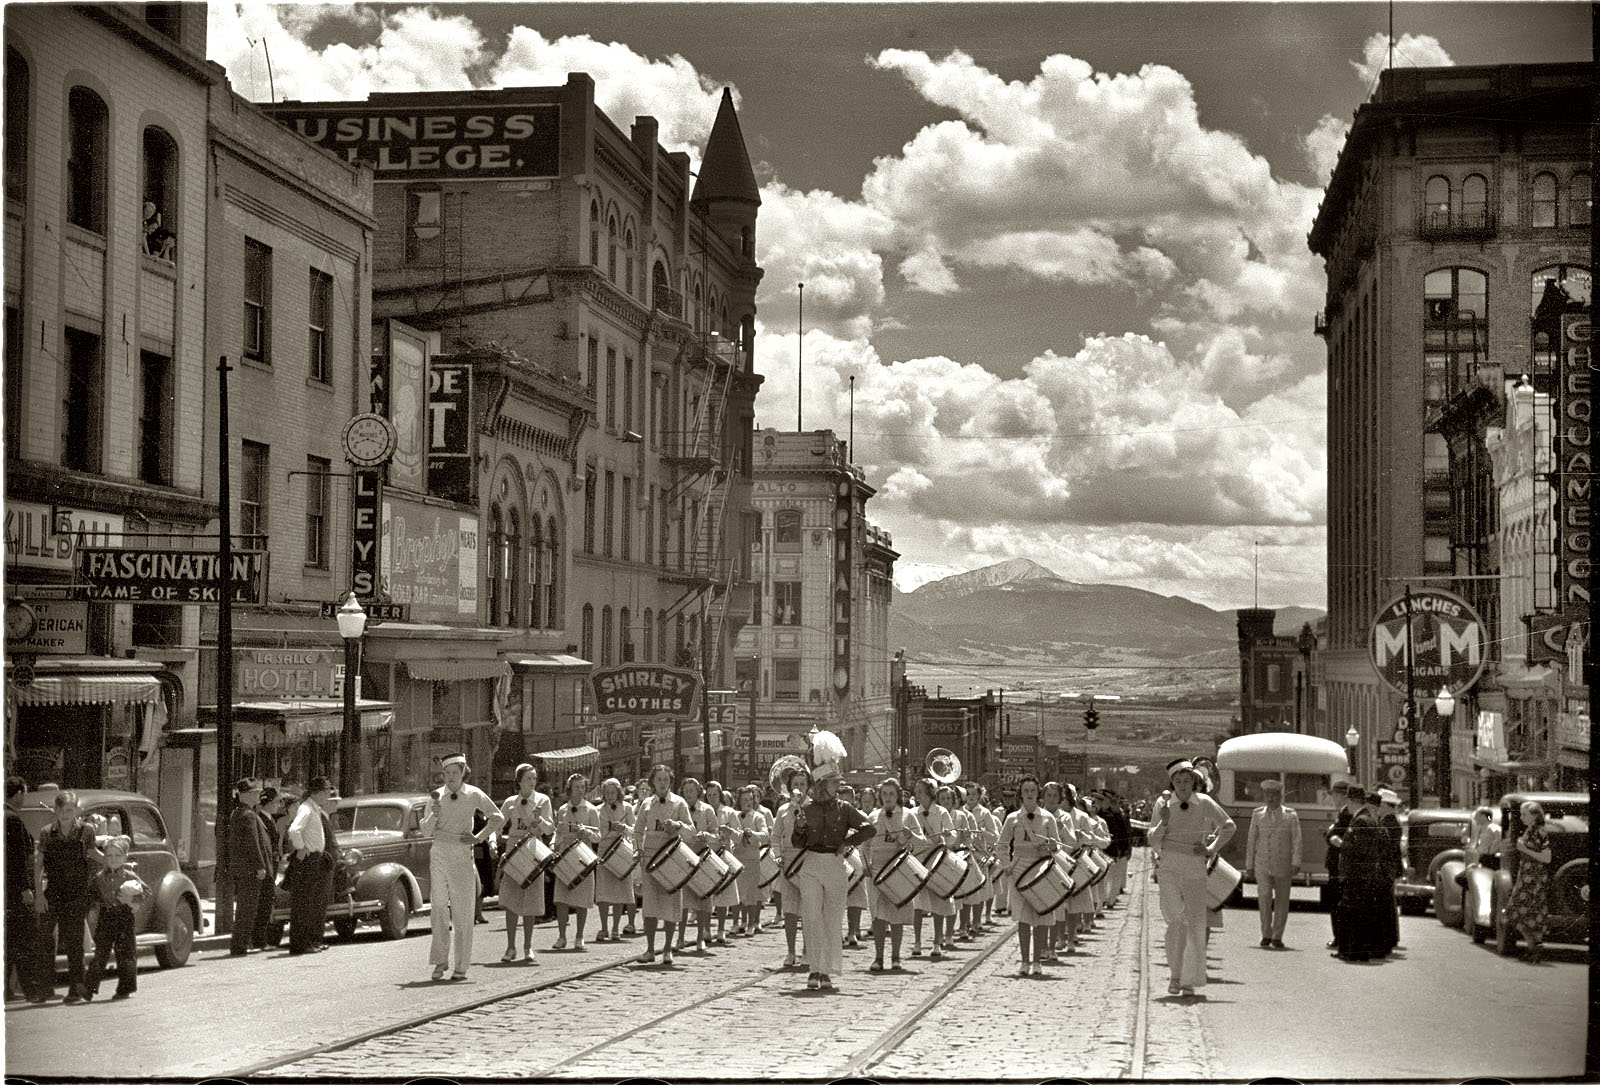 Summer 1939. Butte, Montana. "High school band parading up Montana street." View full size. 35mm nitrate negative by Arthur Rothstein for the FSA.